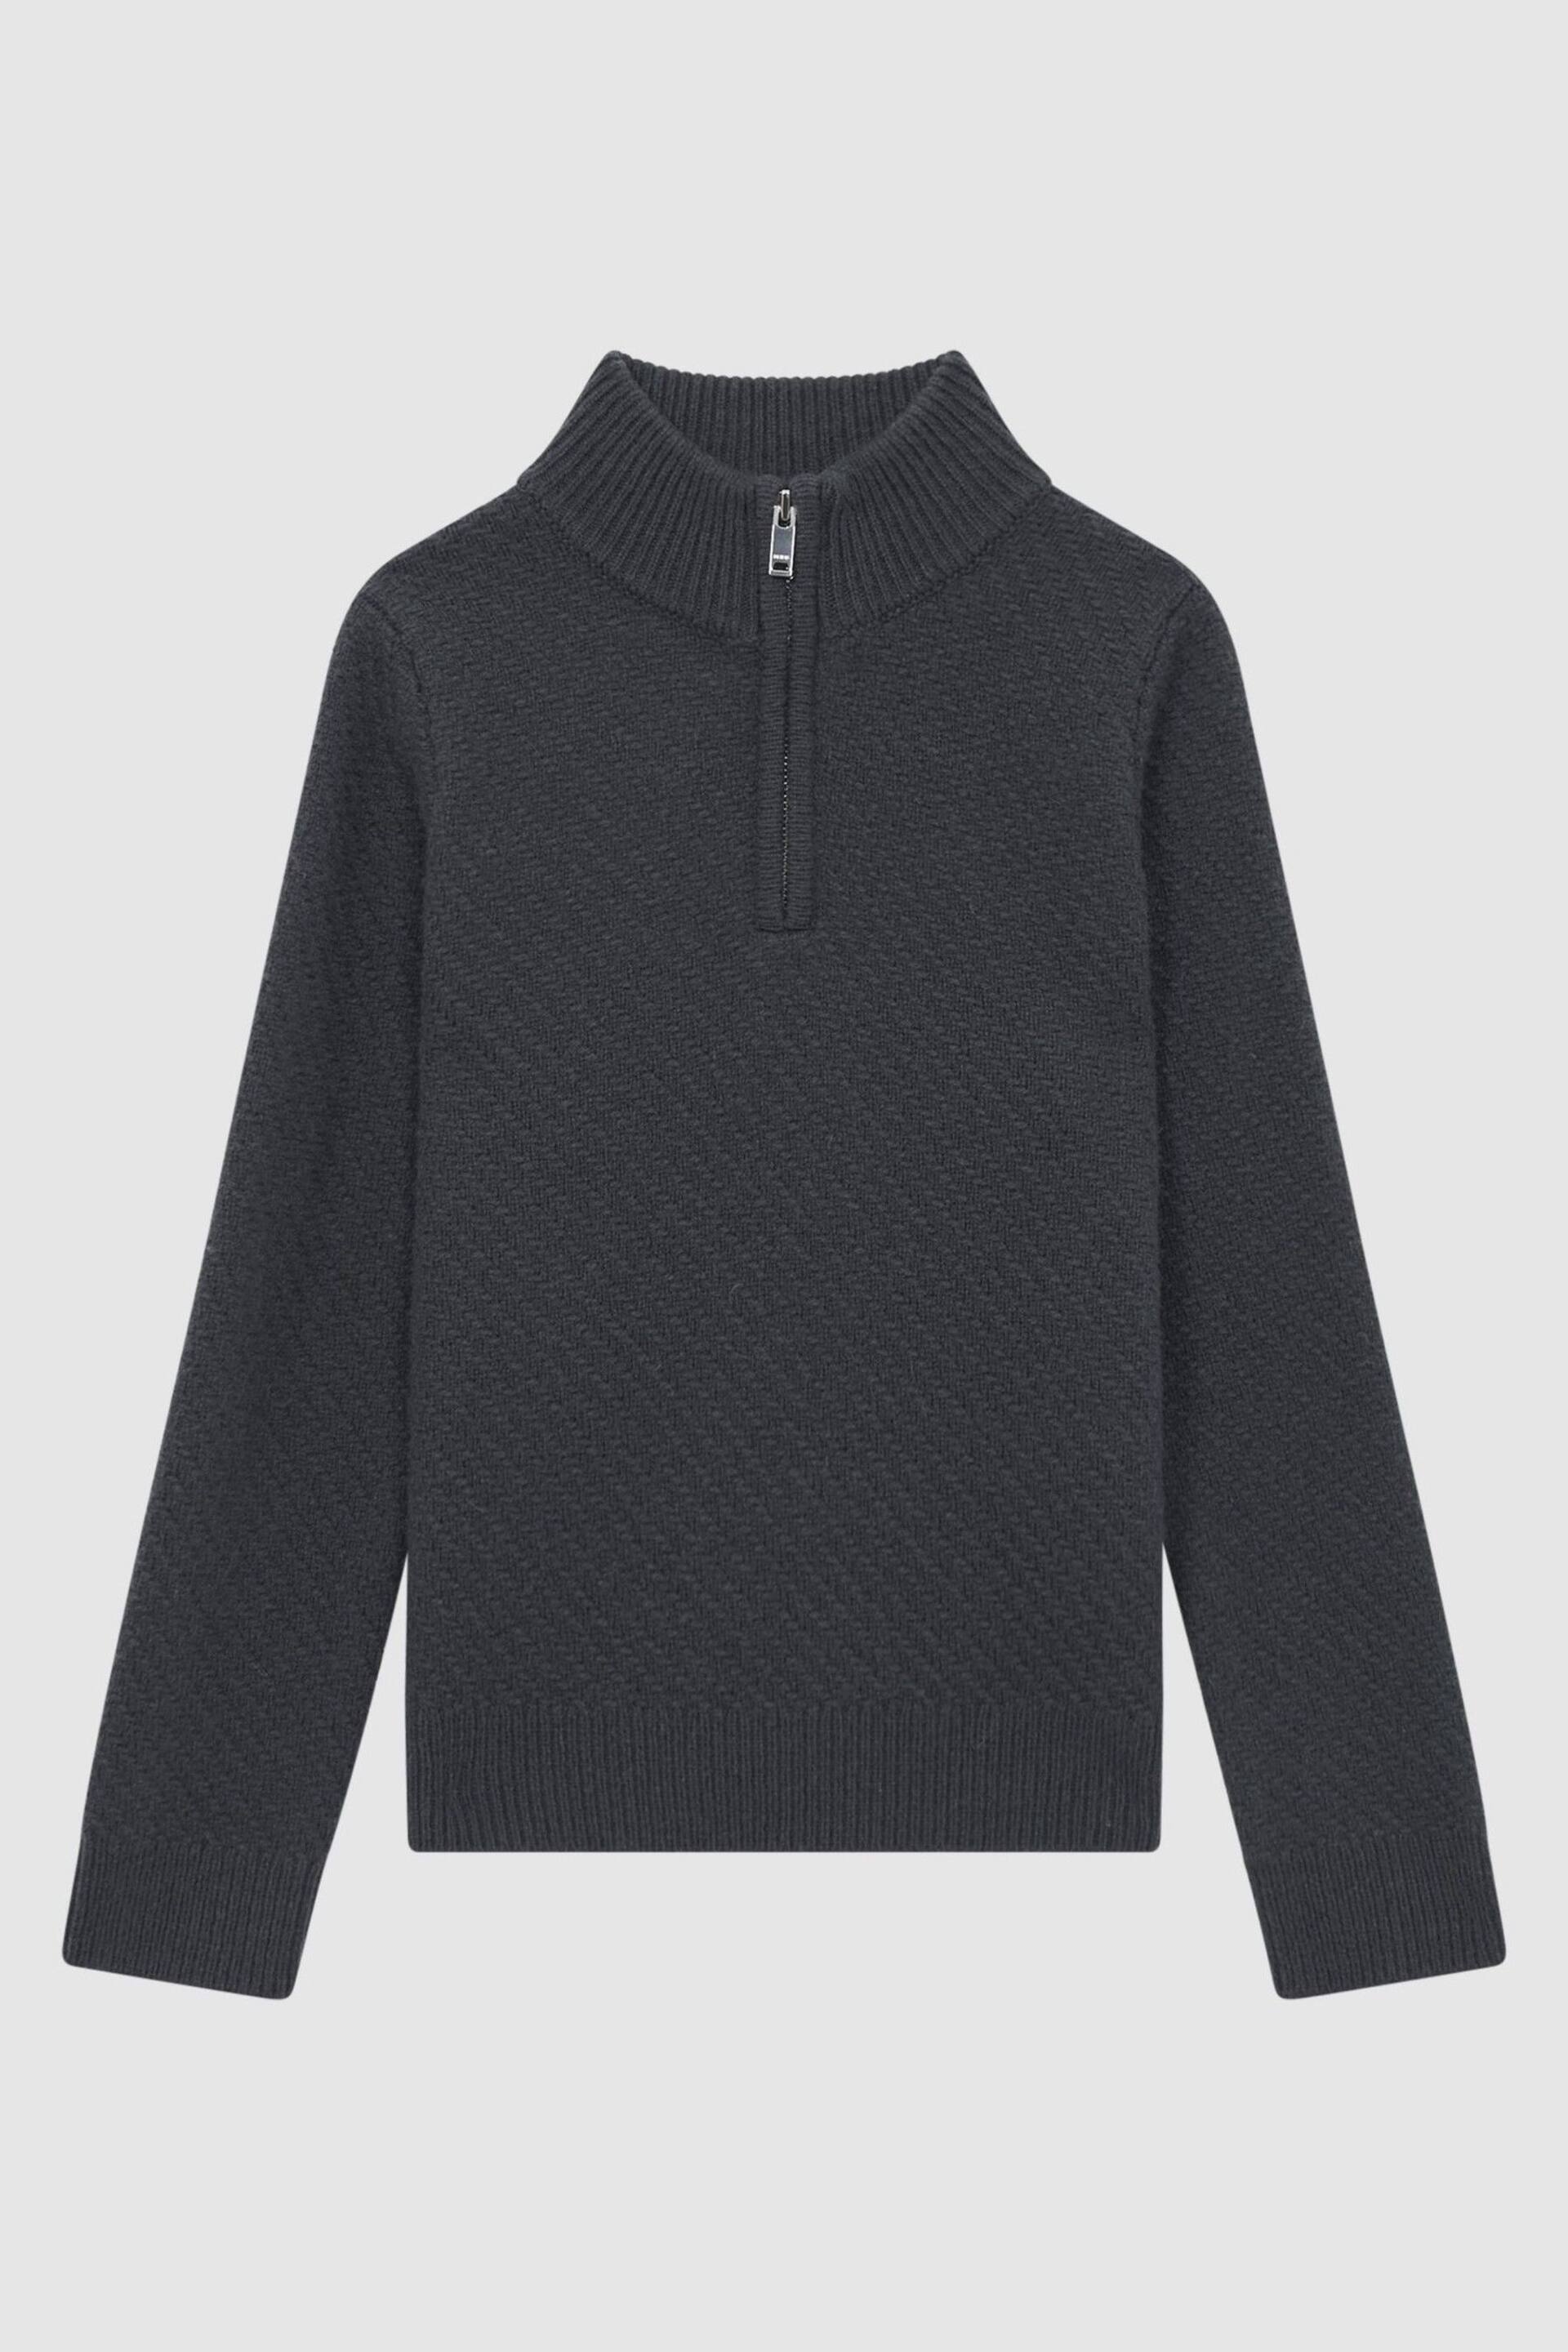 Reiss Anthracite Grey Tempo Senior Slim Fit Knitted Half-Zip Funnel Neck Jumper - Image 2 of 5